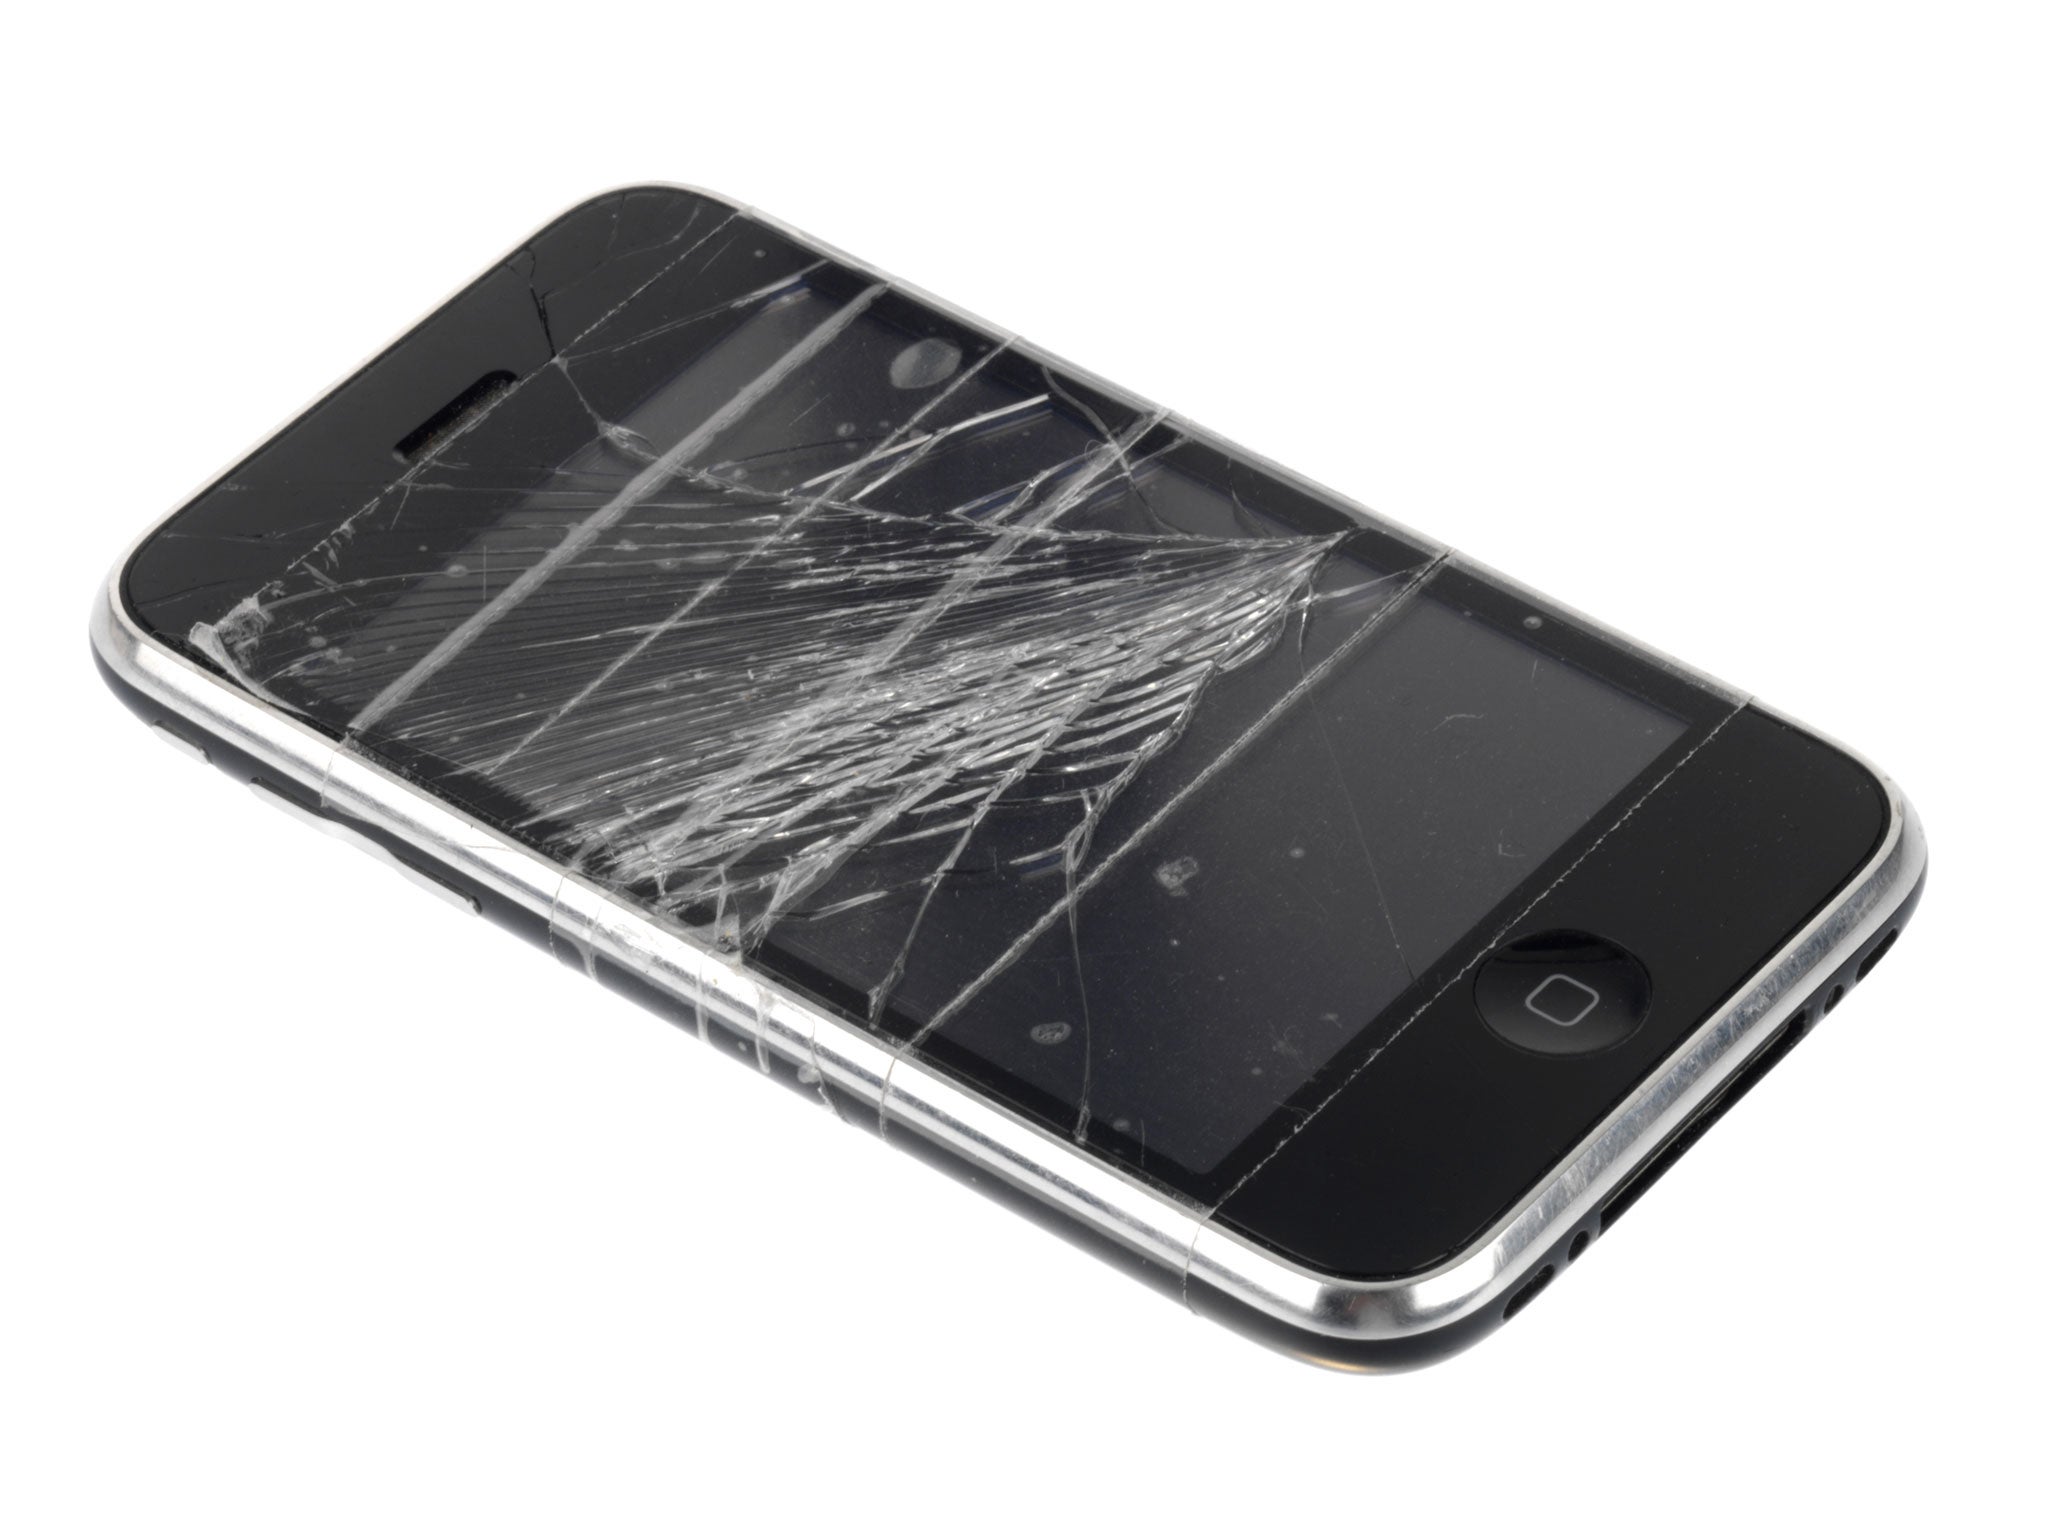 iPhone owners know about shattered screens, so what's the solution?